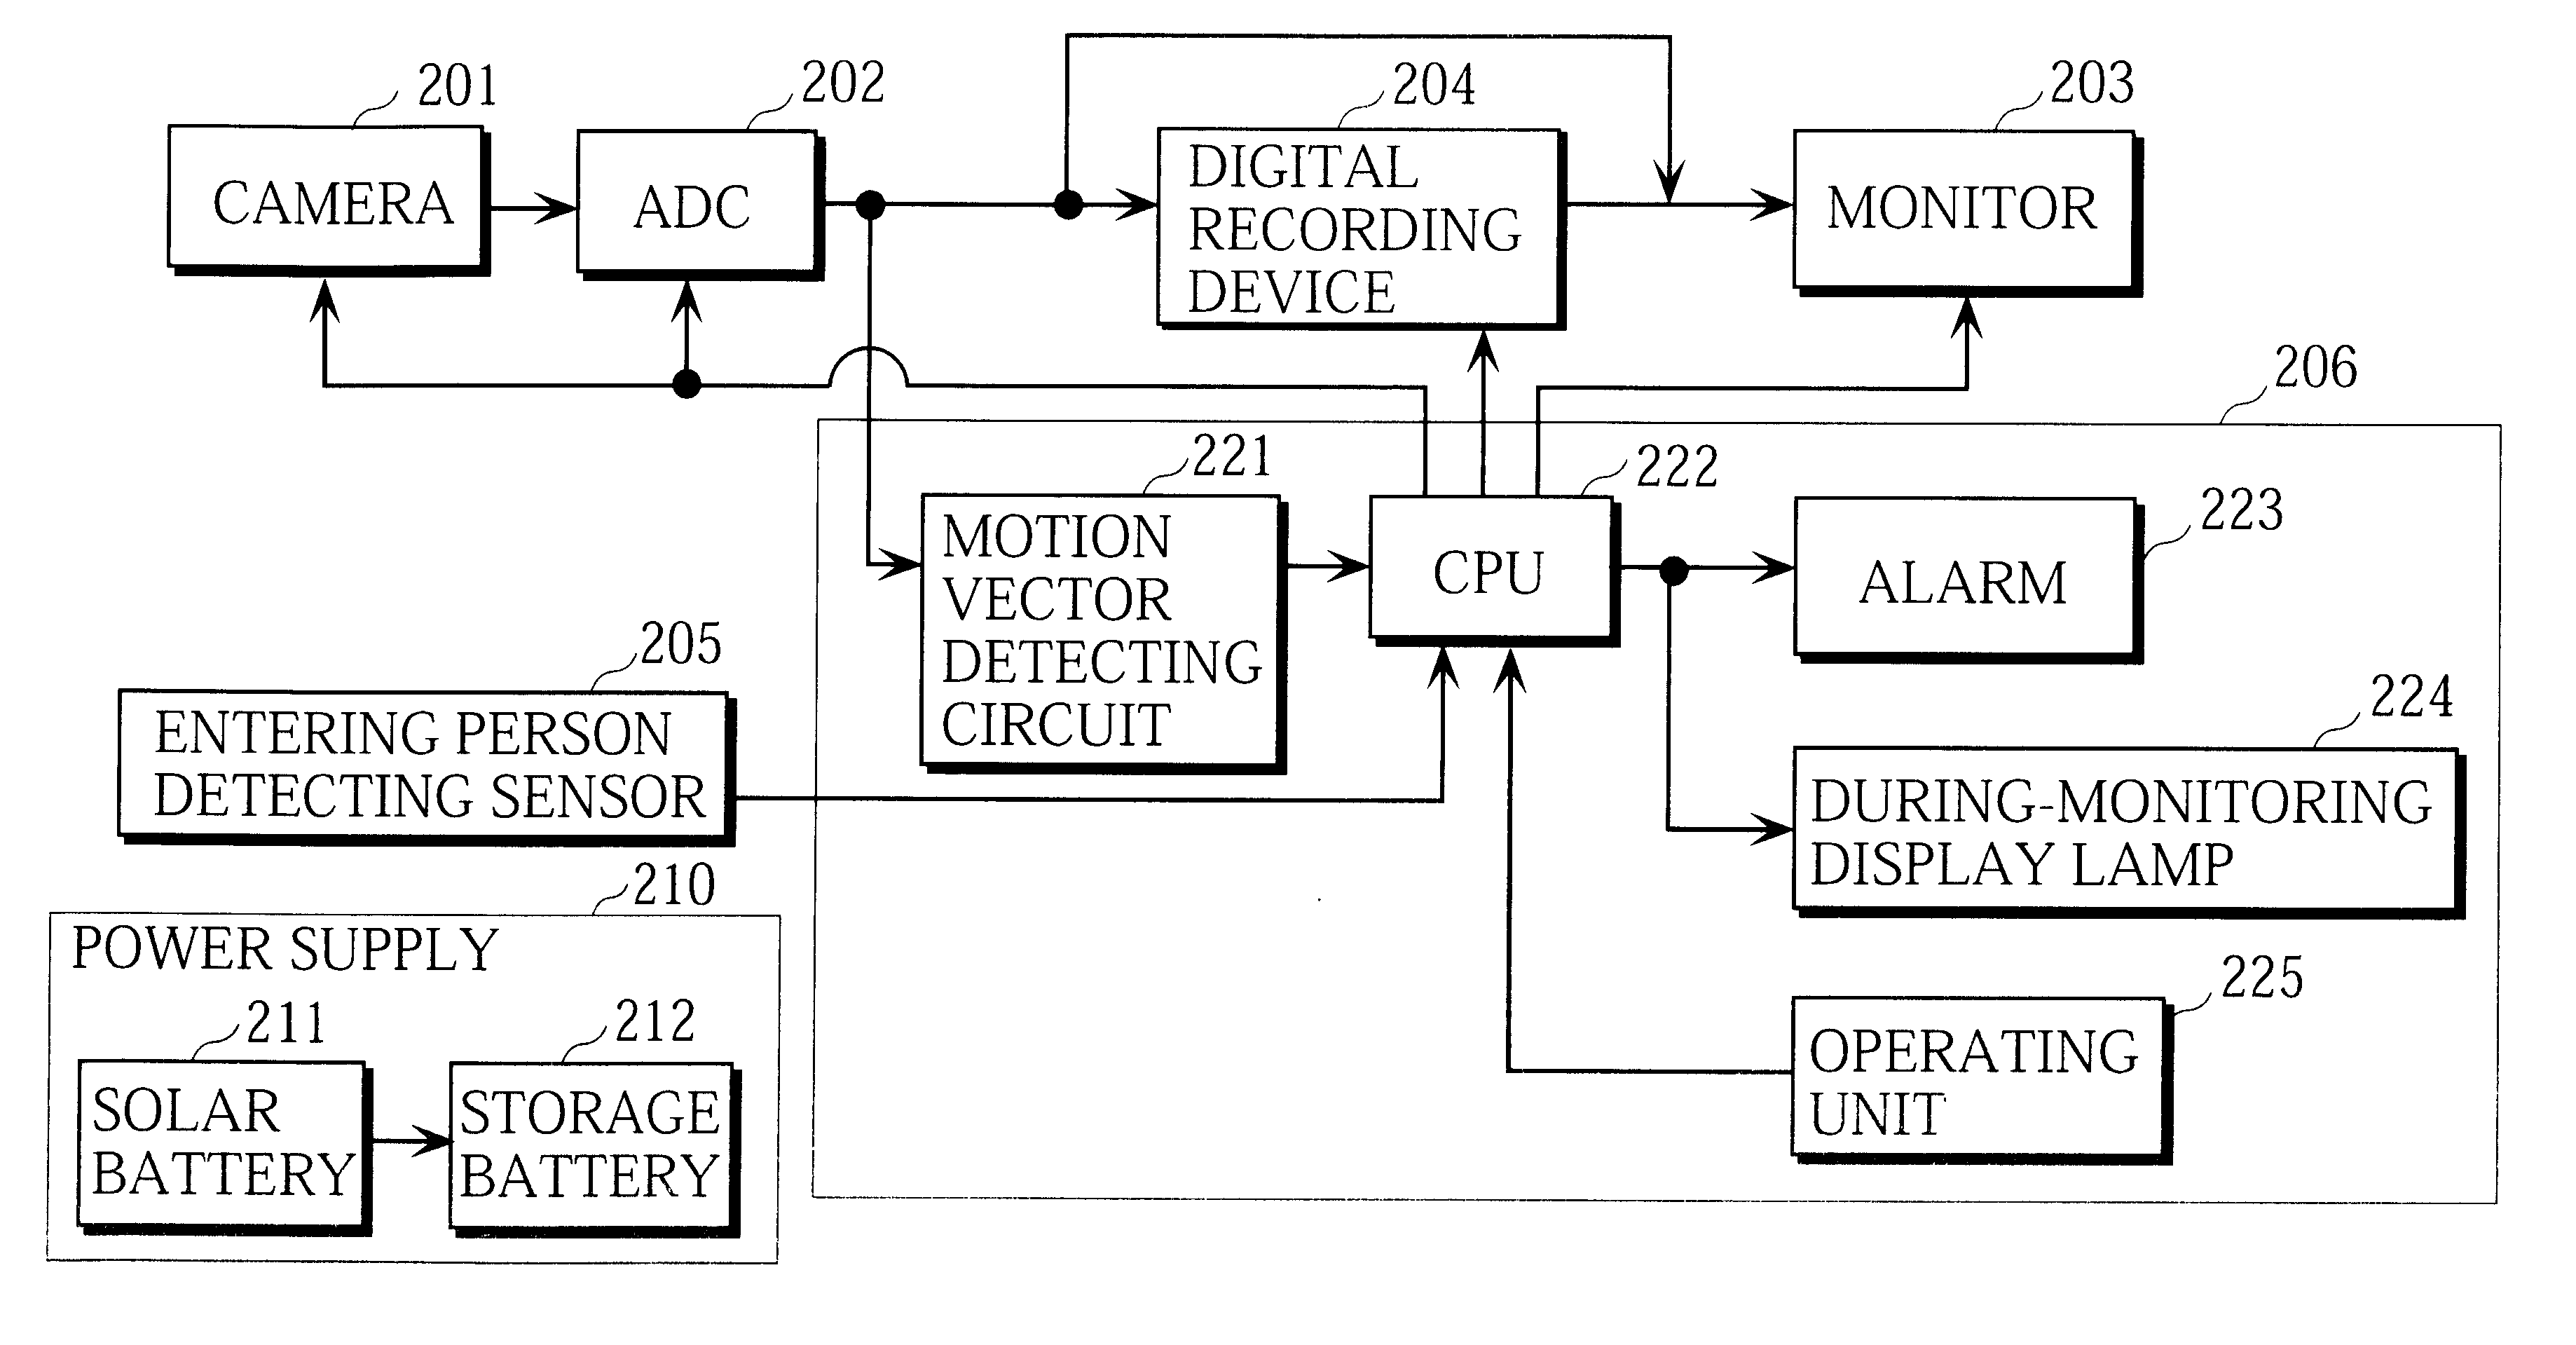 Monitoring system and imaging system